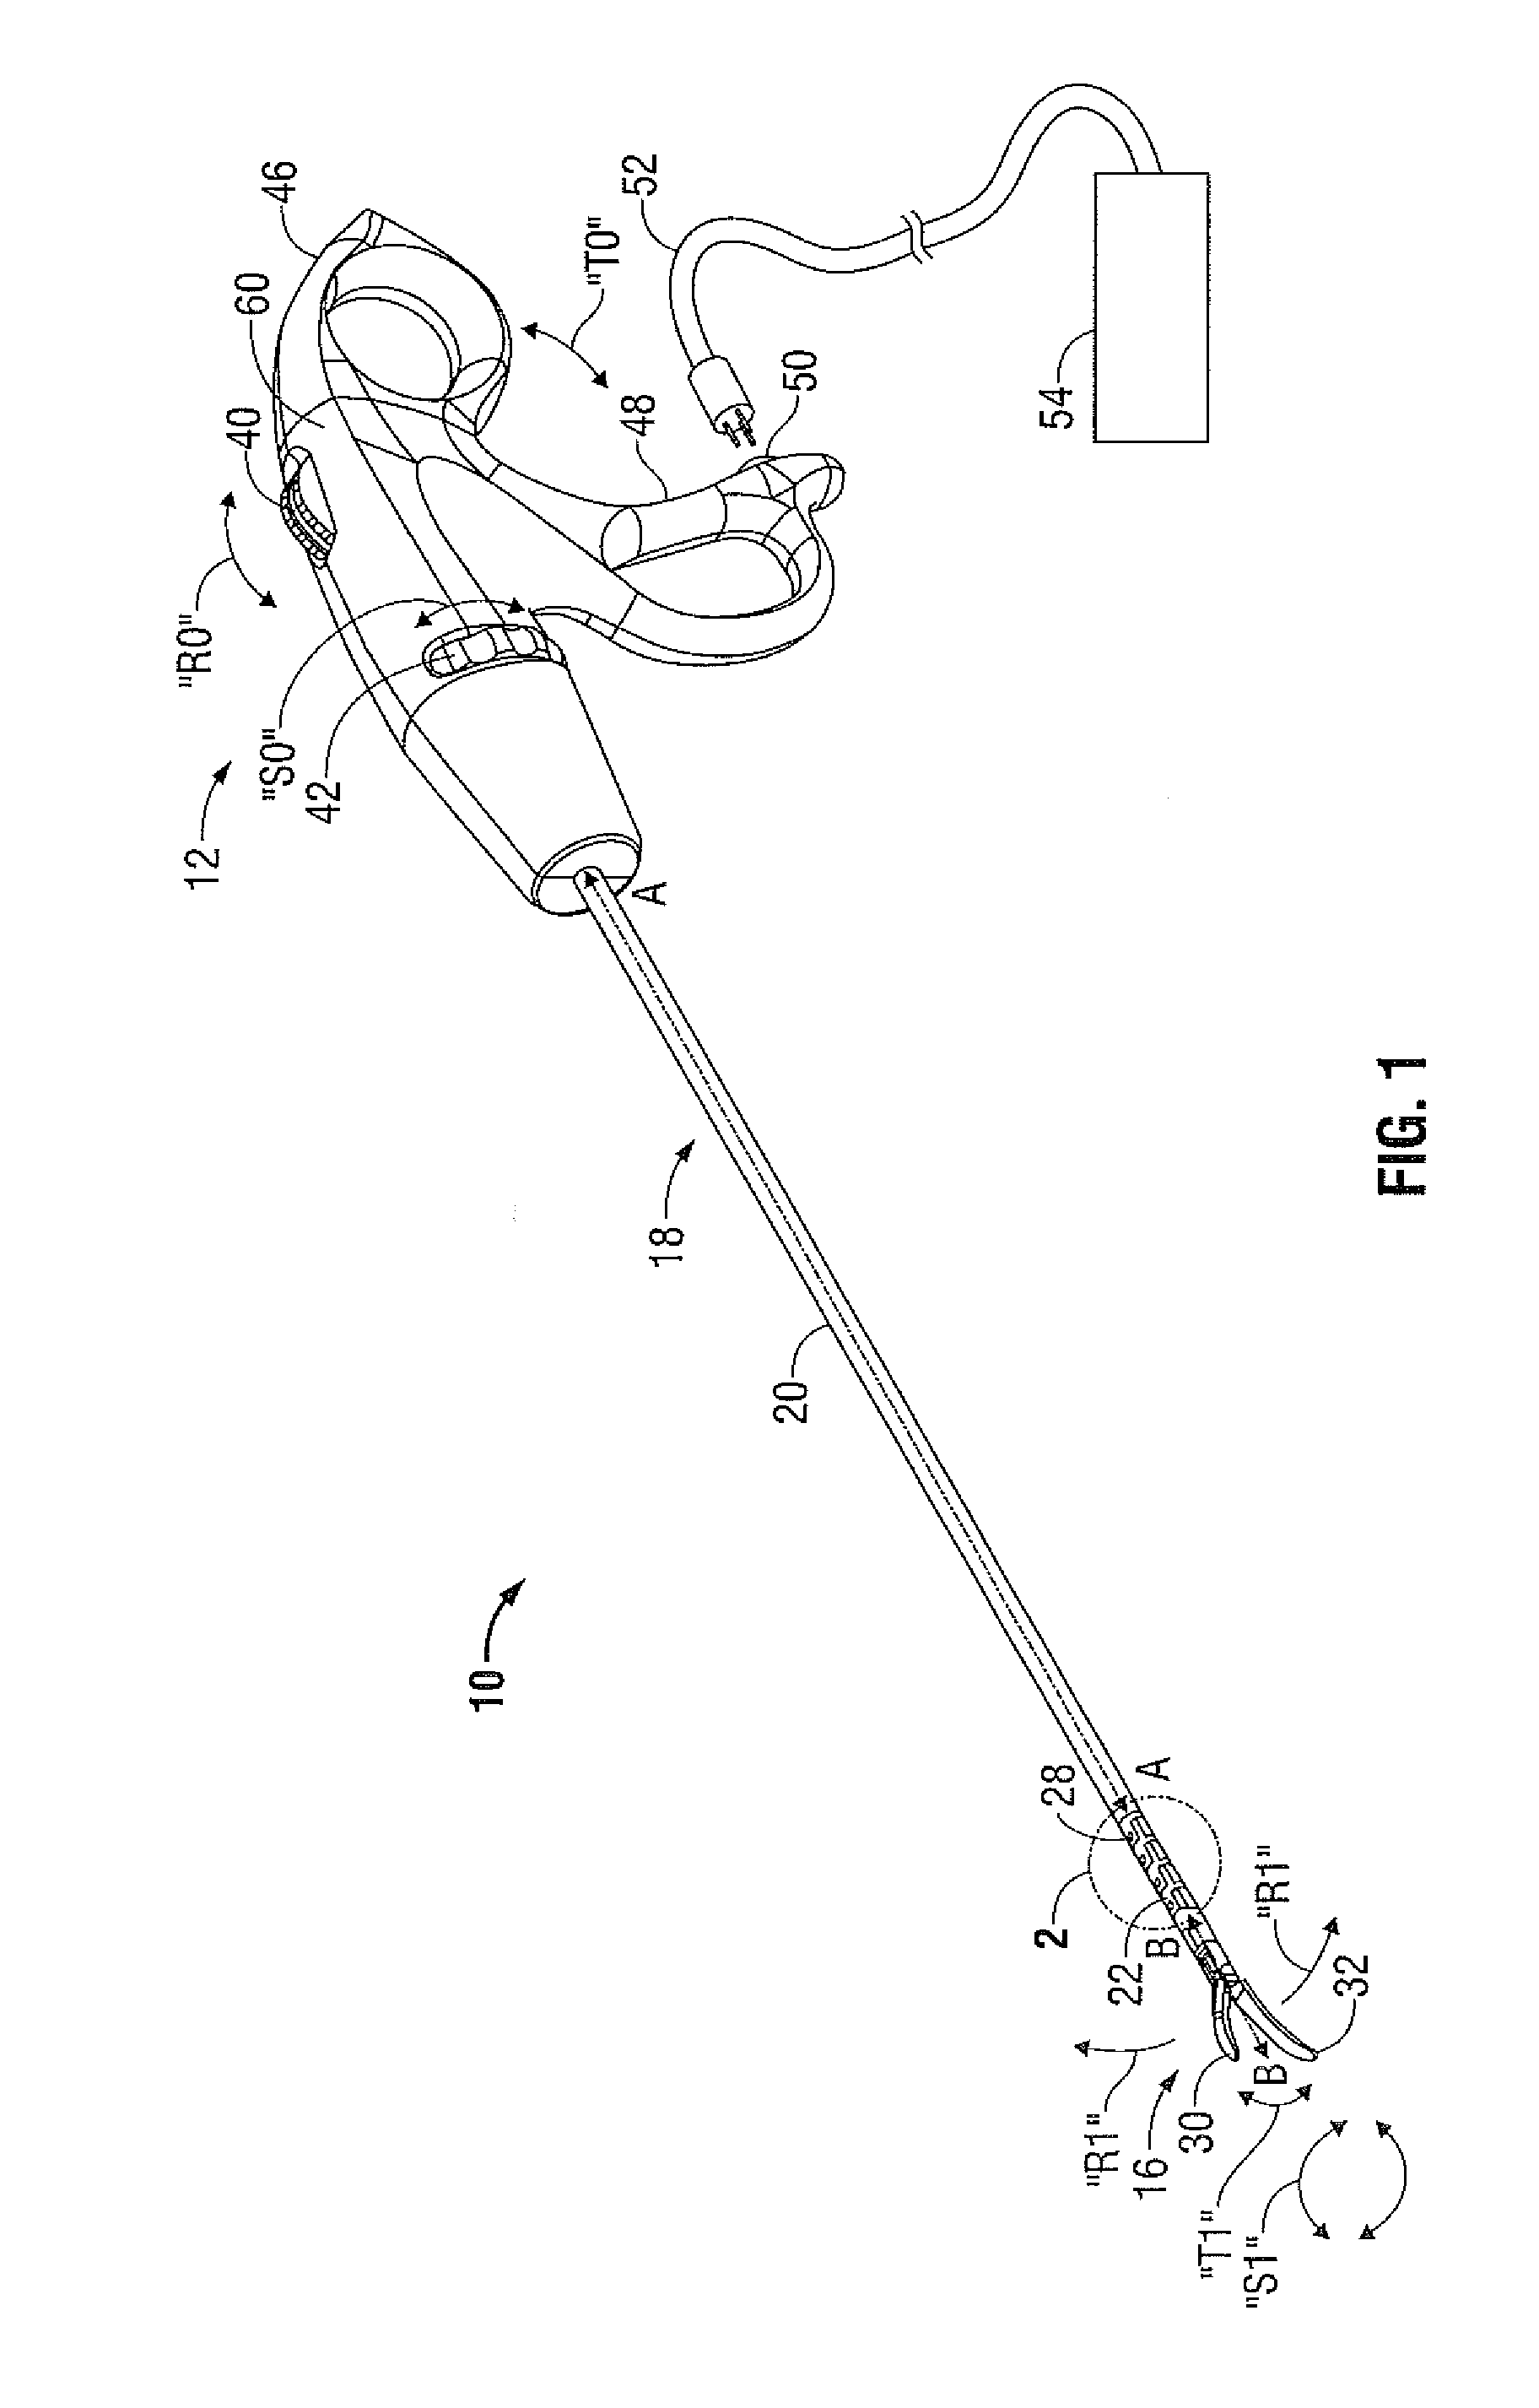 Drive Mechanism for Articulation of a Surgical Instrument